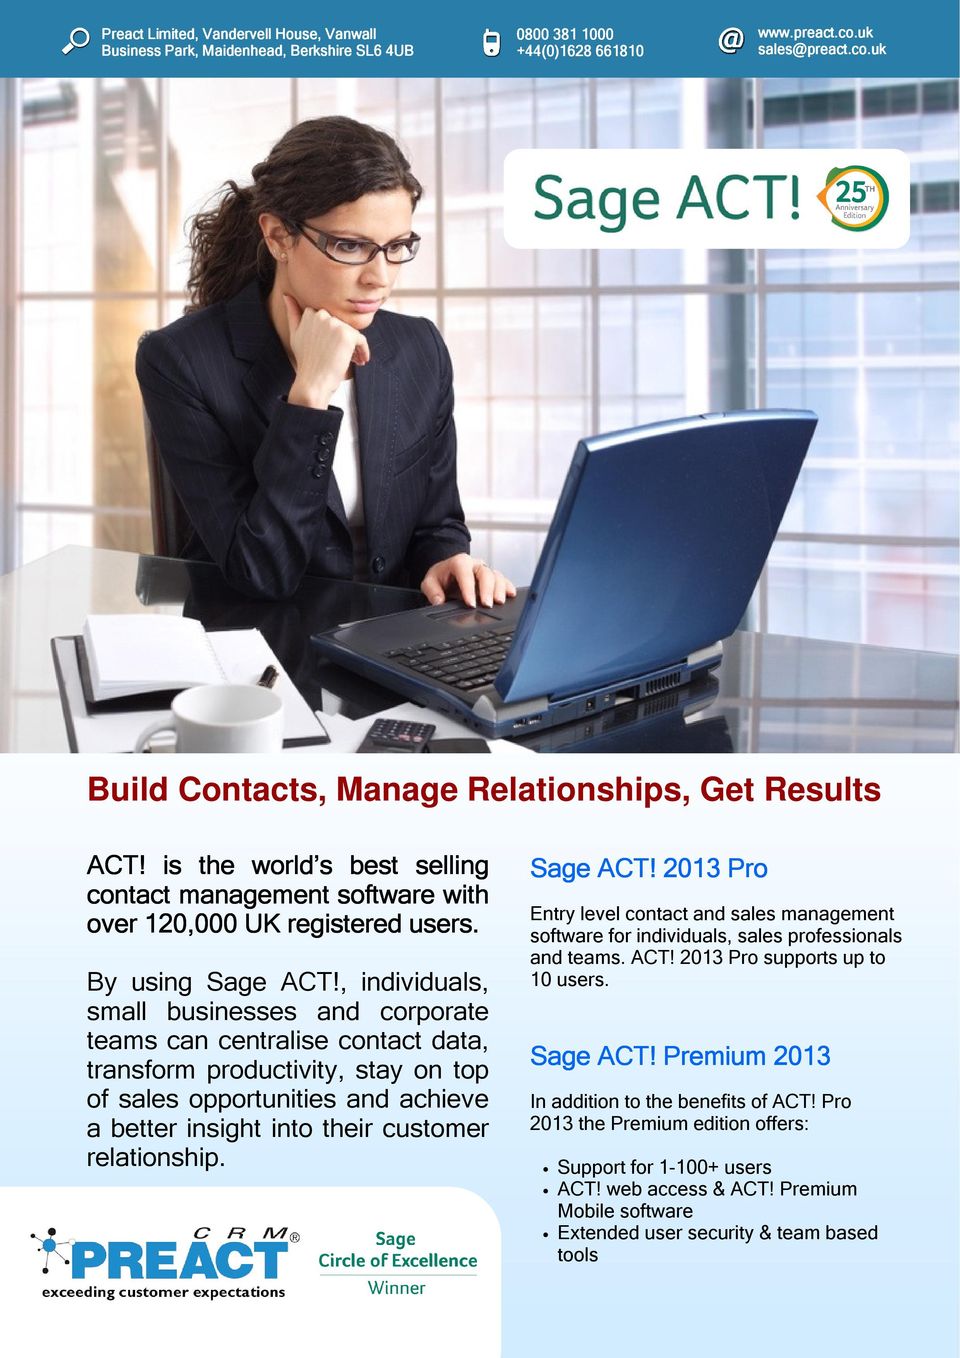 customer relationship. Sage ACT! 2013 Pro Entry level contact and sales management software for individuals, sales professionals and teams. ACT! 2013 Pro supports up to 10 users.